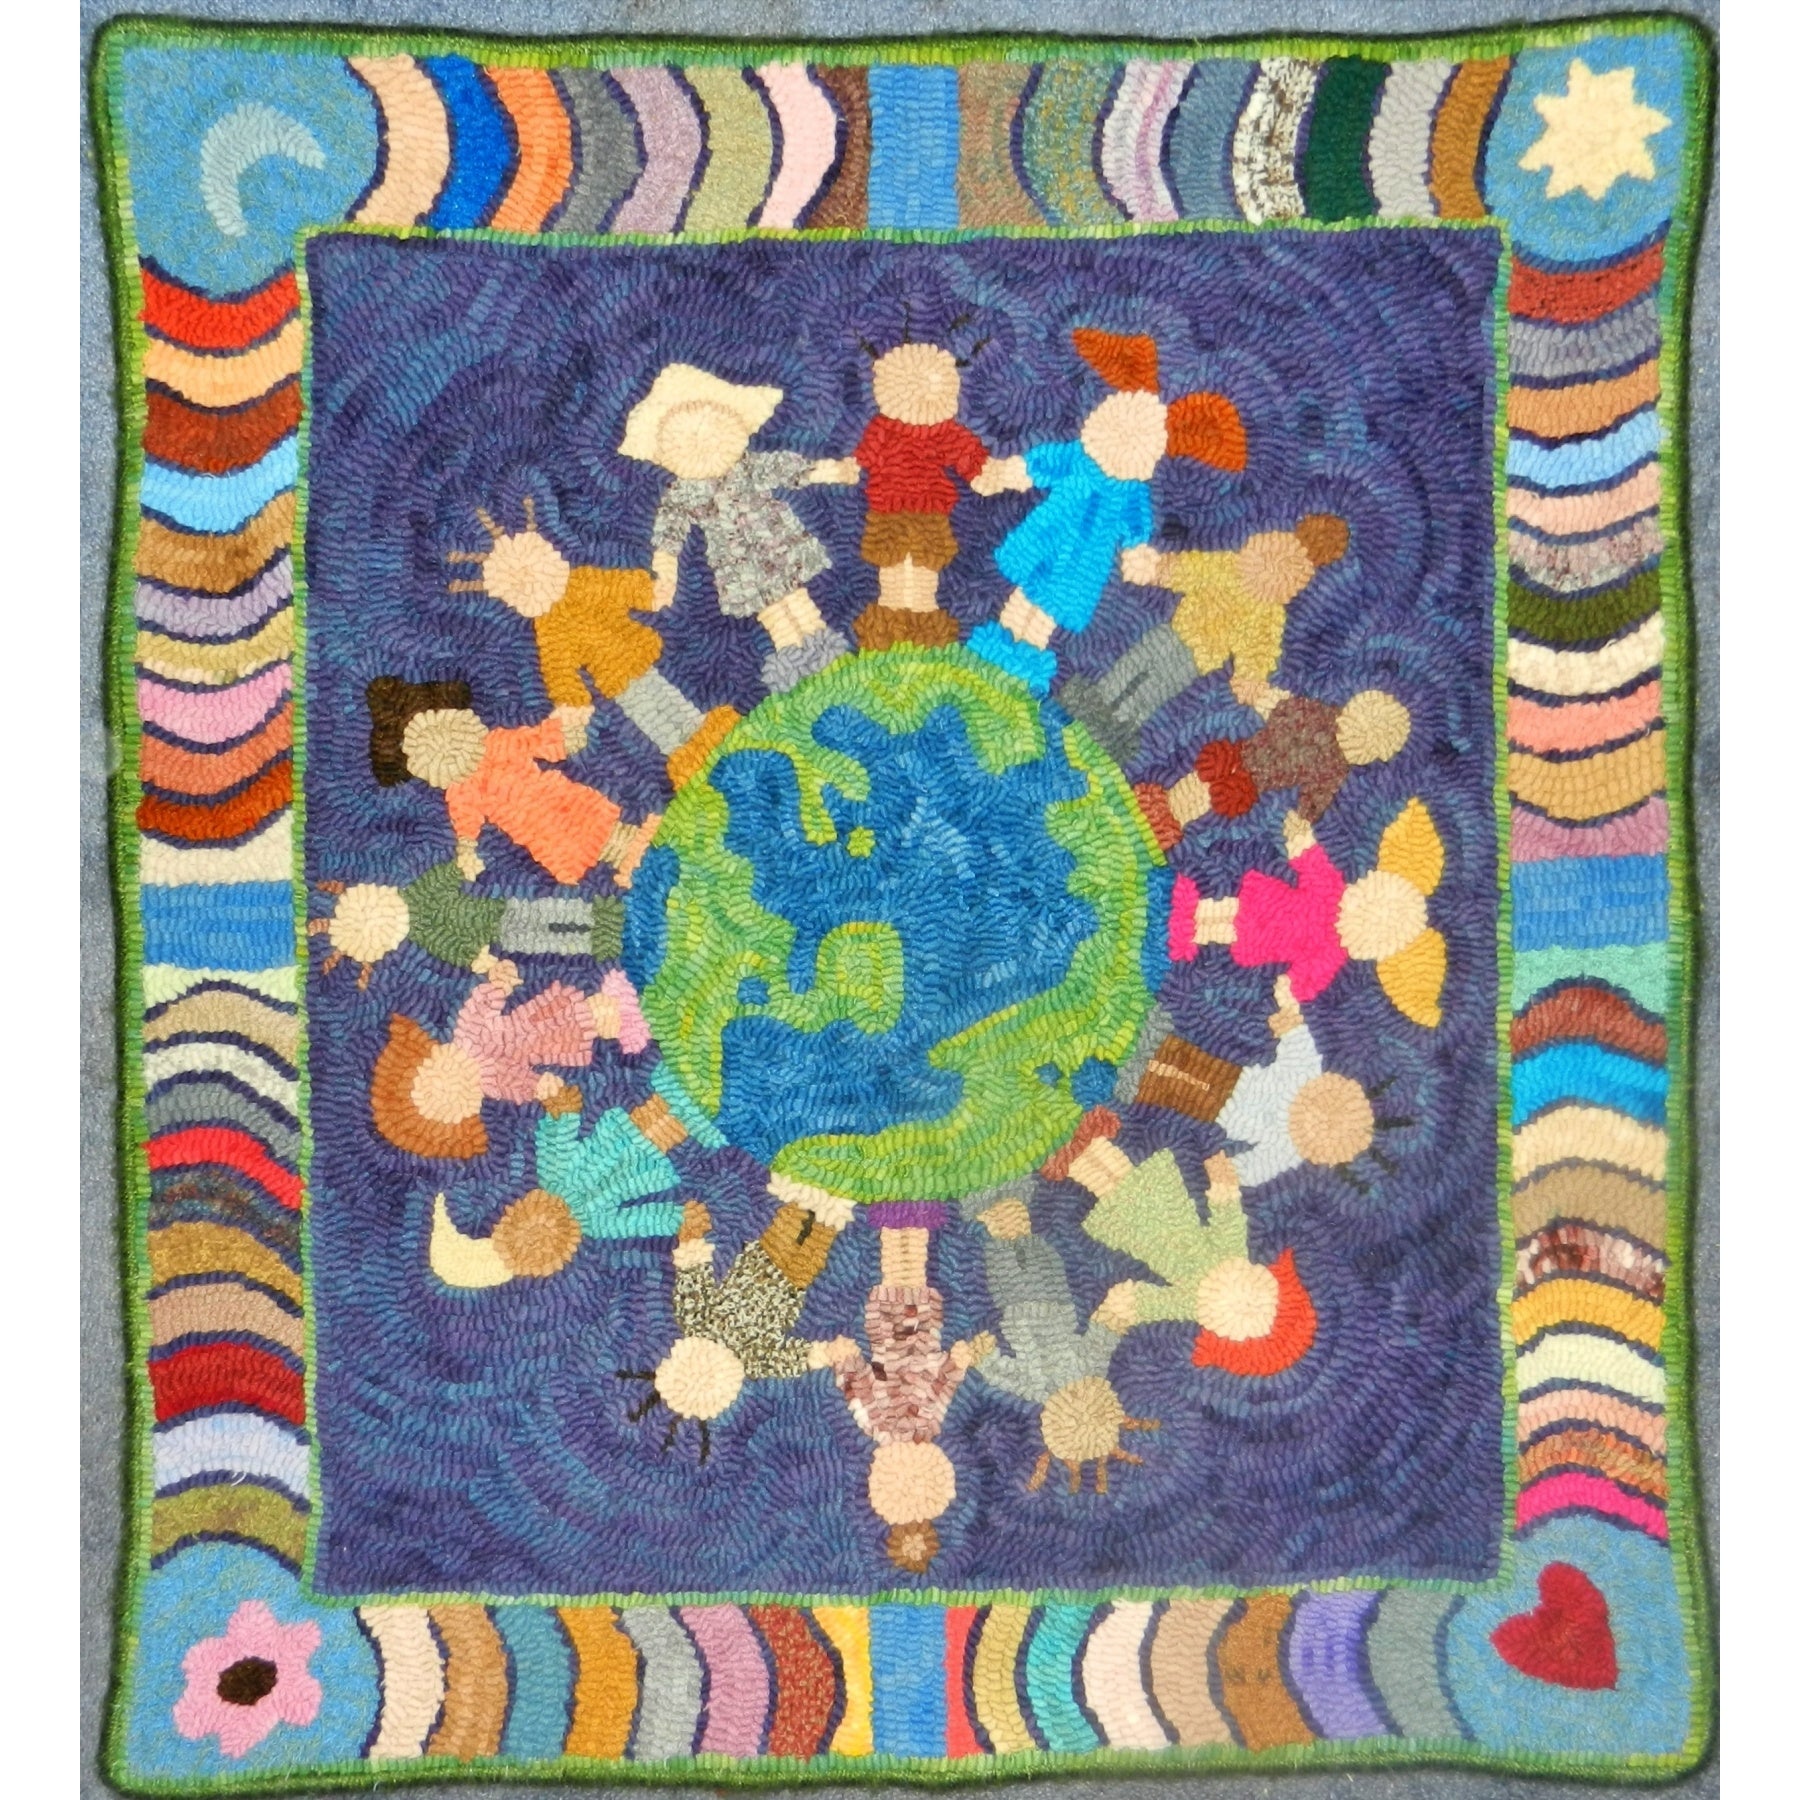 Perfect Harmony, rug hooked by Carolyn Cooke